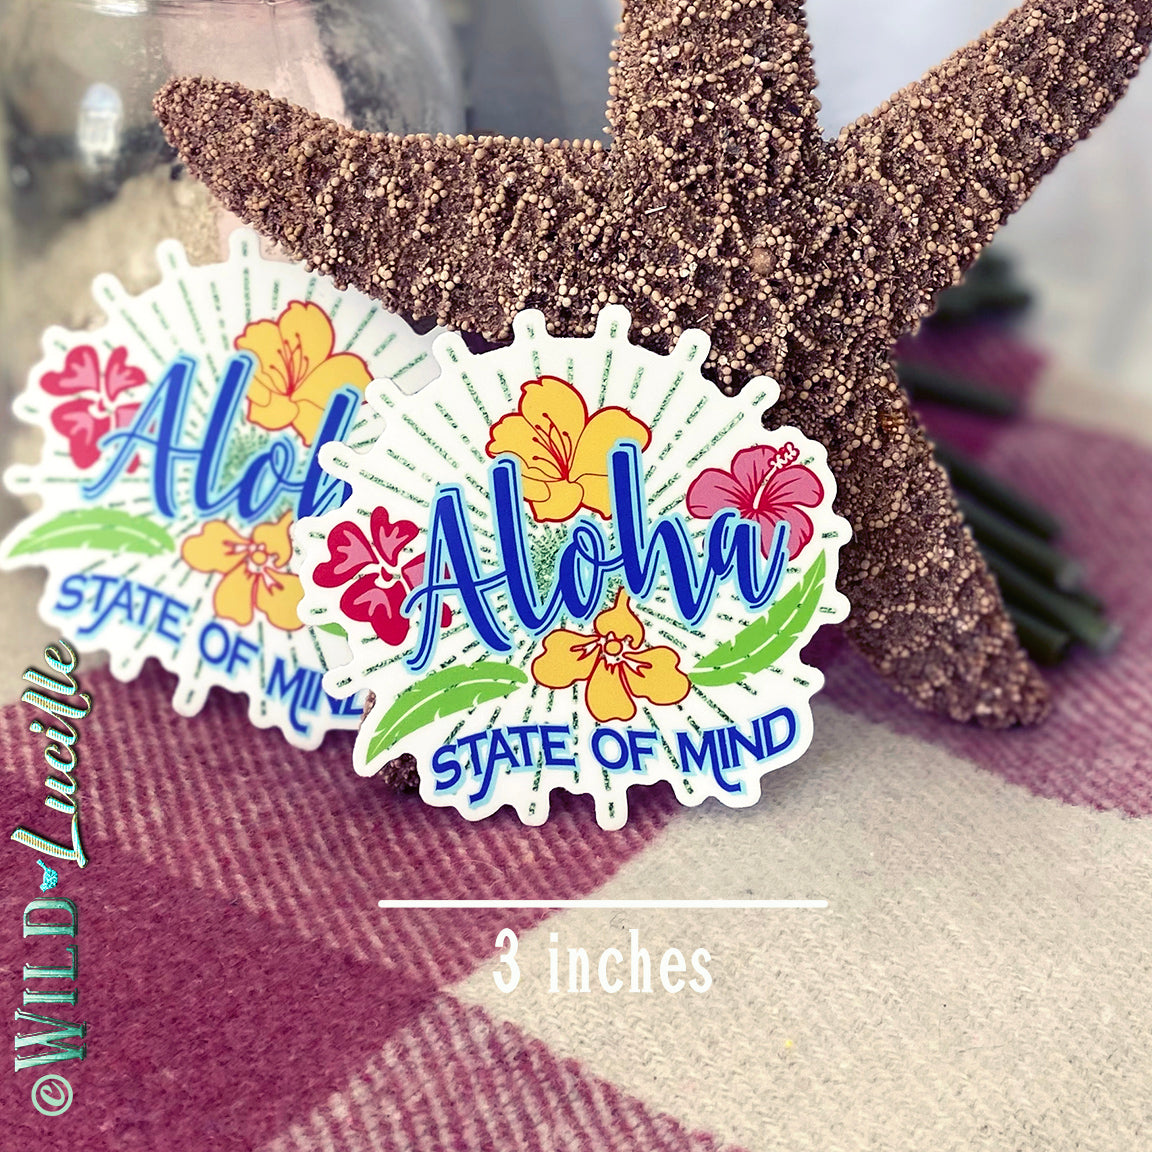 Aloha State of Mind Vinyl Decal